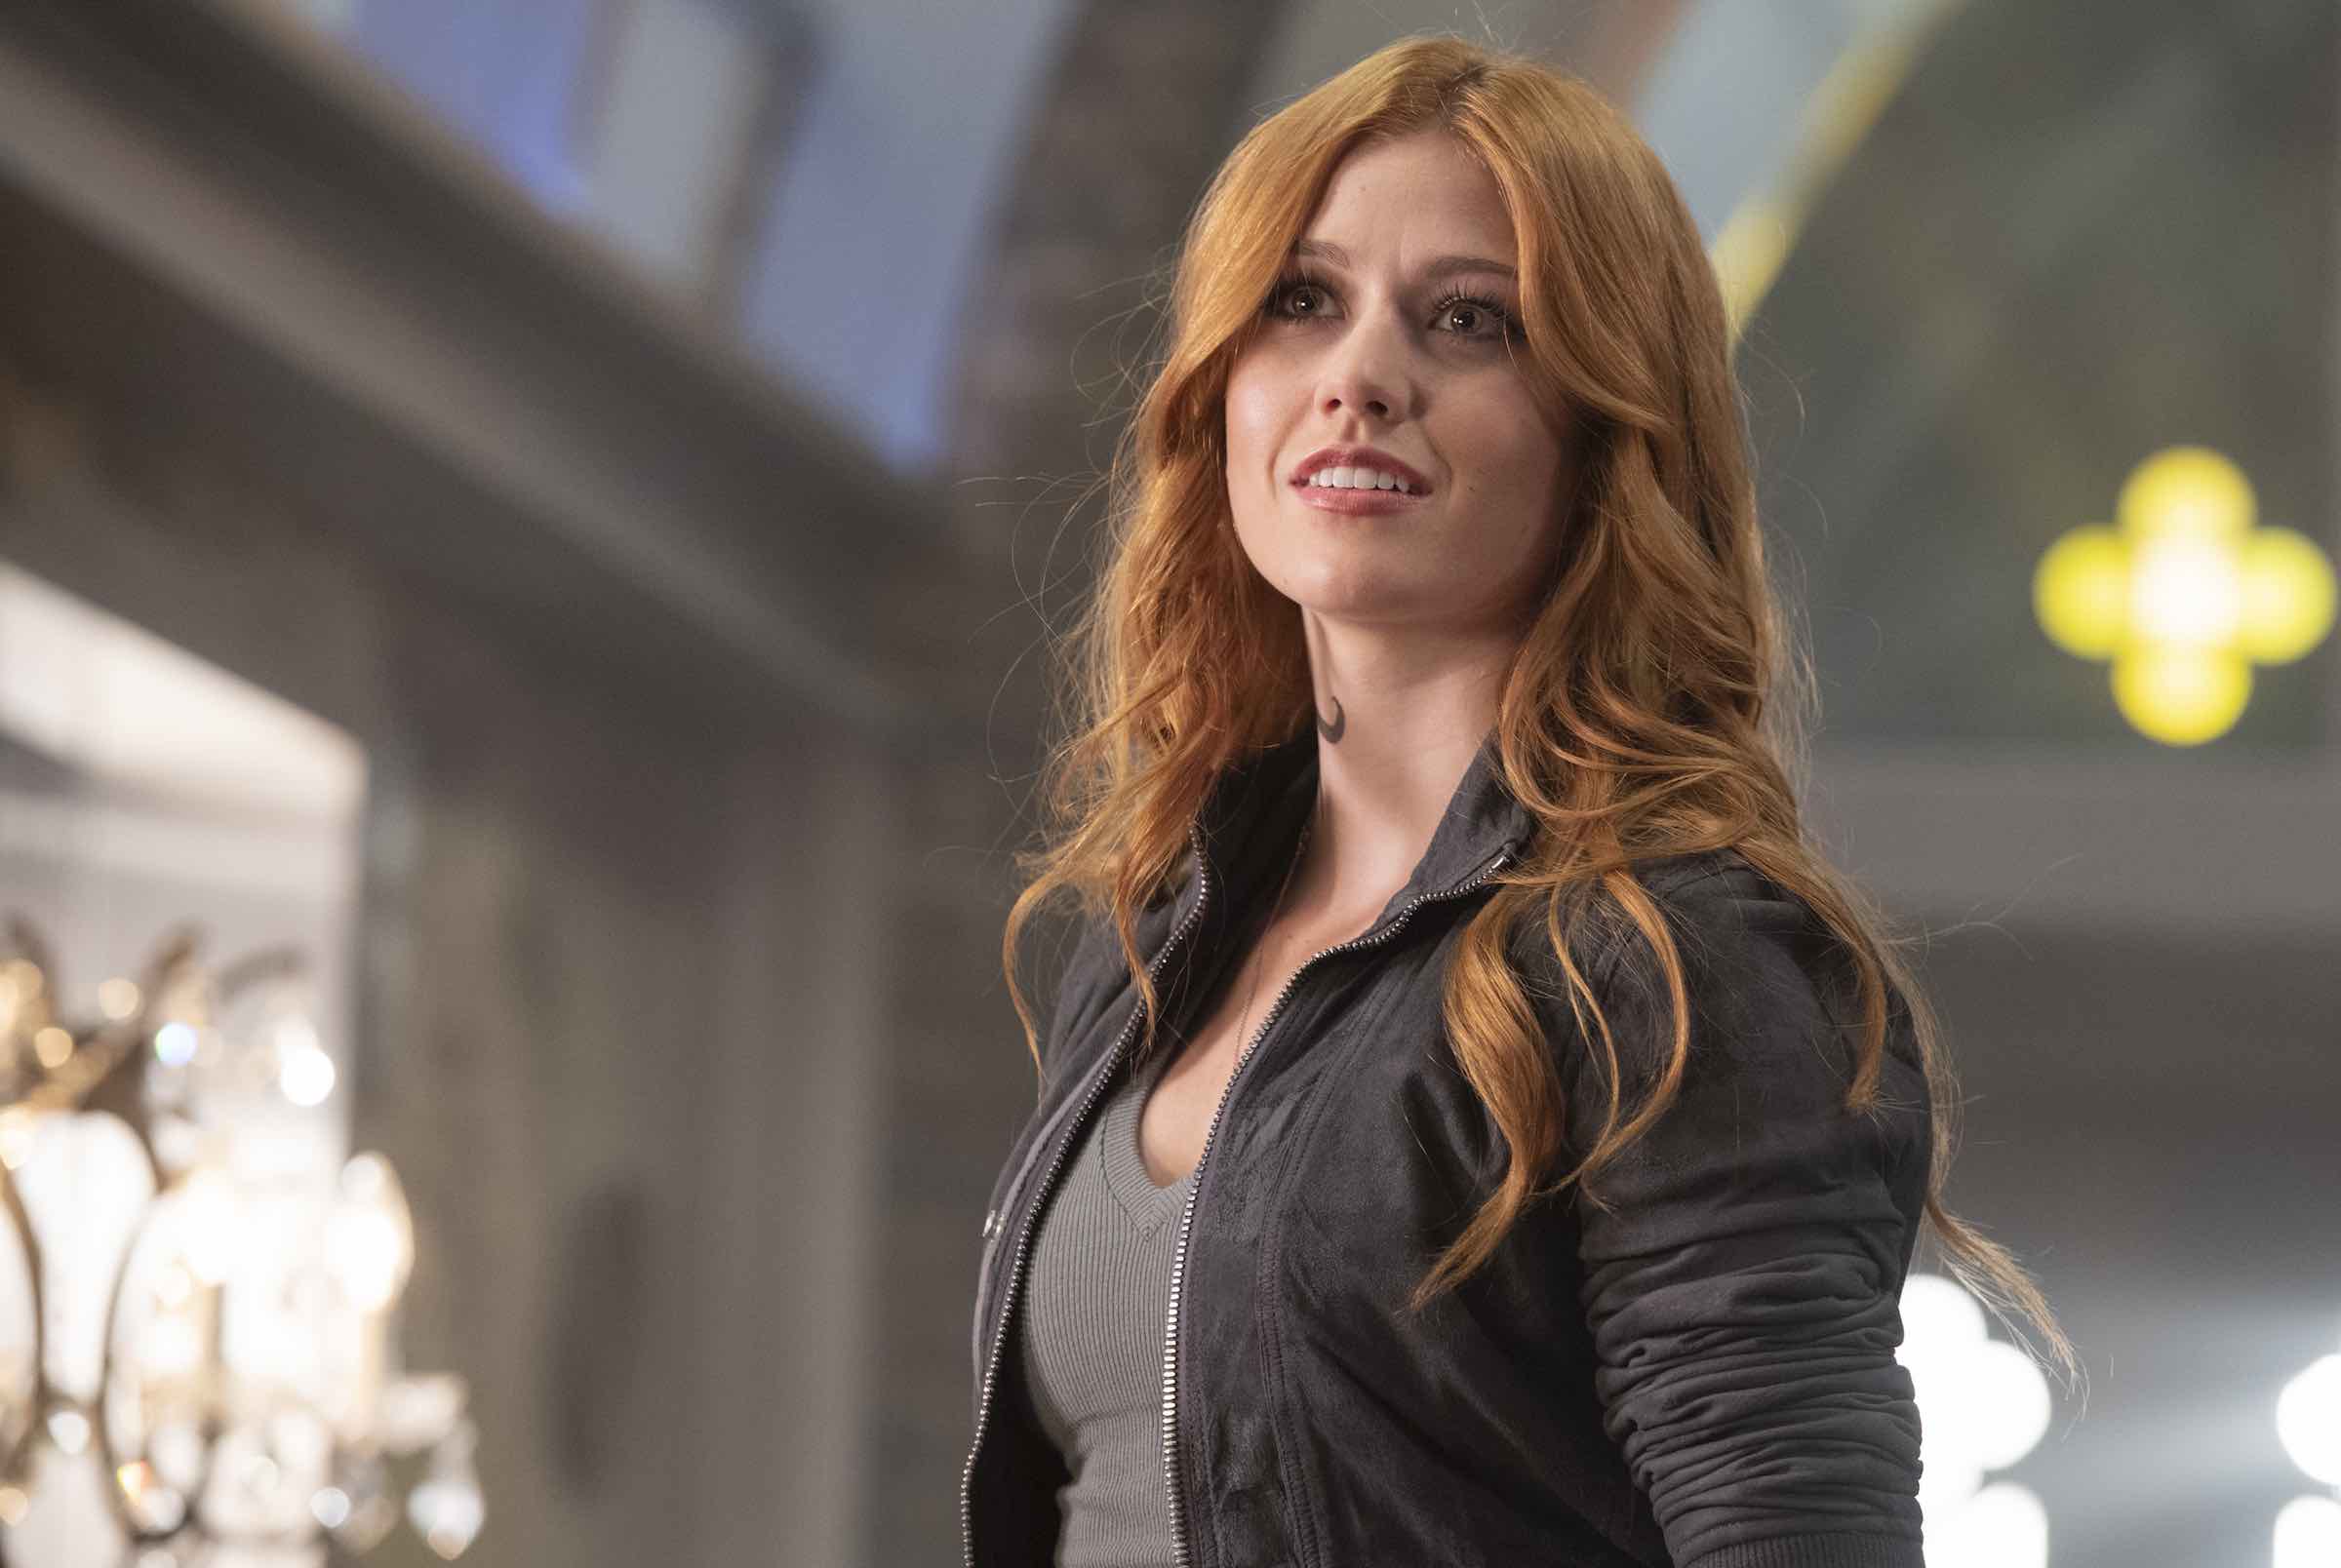 To bolster our spirits, we thought it prudent to share the information we have about the 'Shadowhunters' finale, “All Good Things”, airing this Monday.